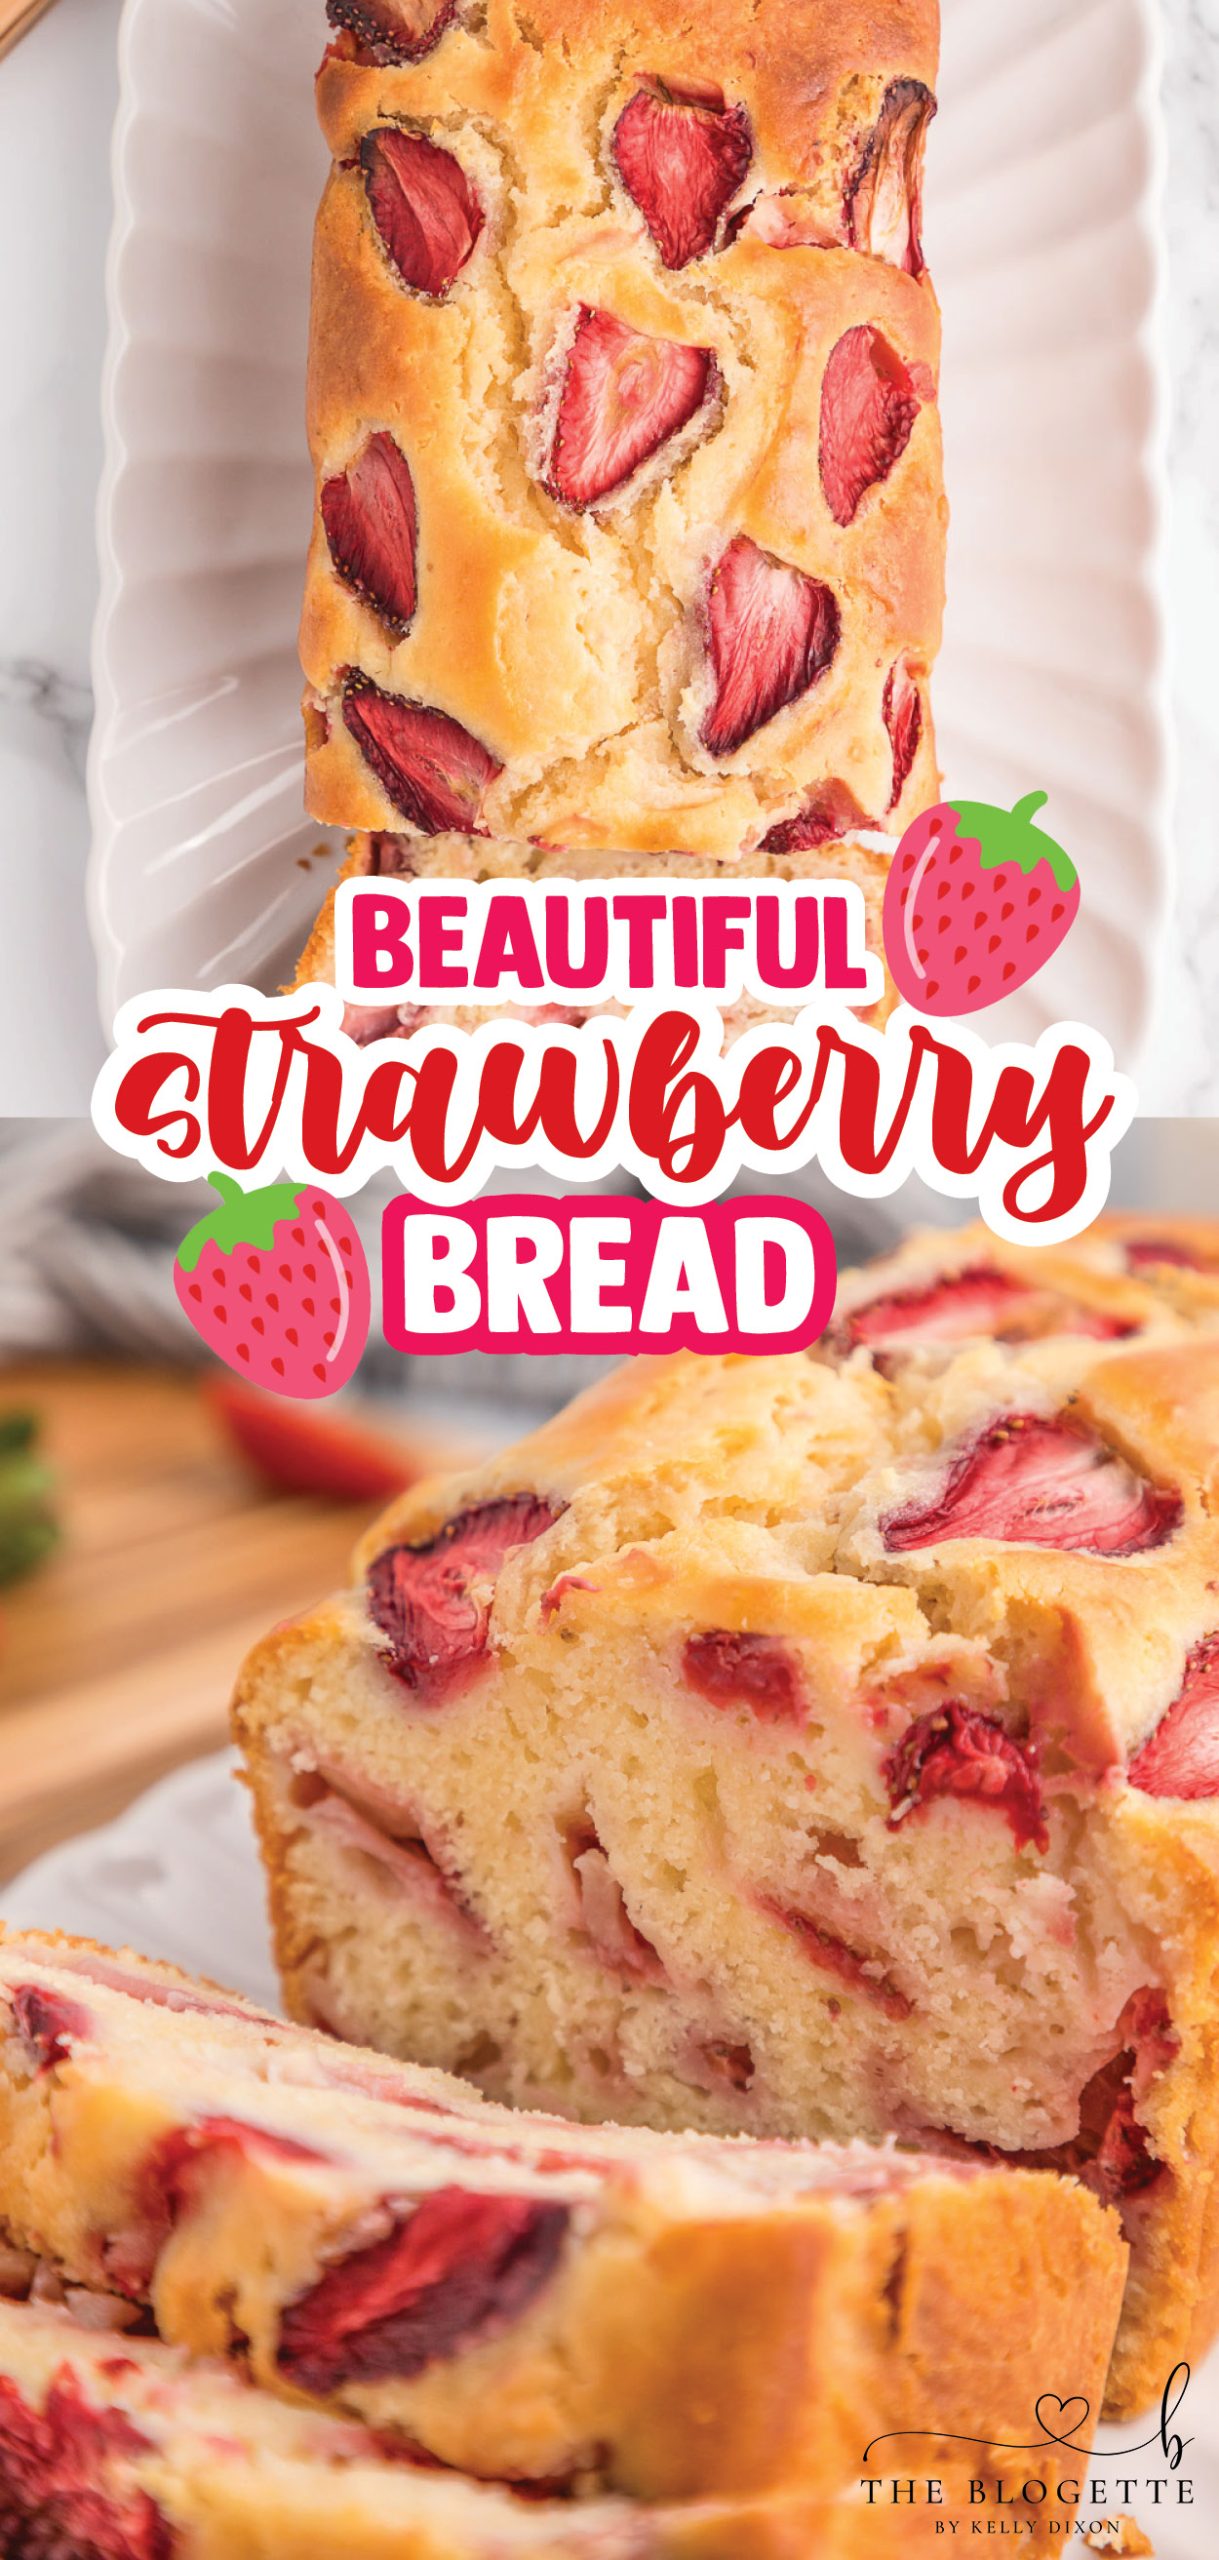 Sweet and soft Strawberry Bread is a spring and summer staple treat! Made with fresh strawberries, this quick bread recipe is the perfect way to enjoy strawberries while they’re in season.